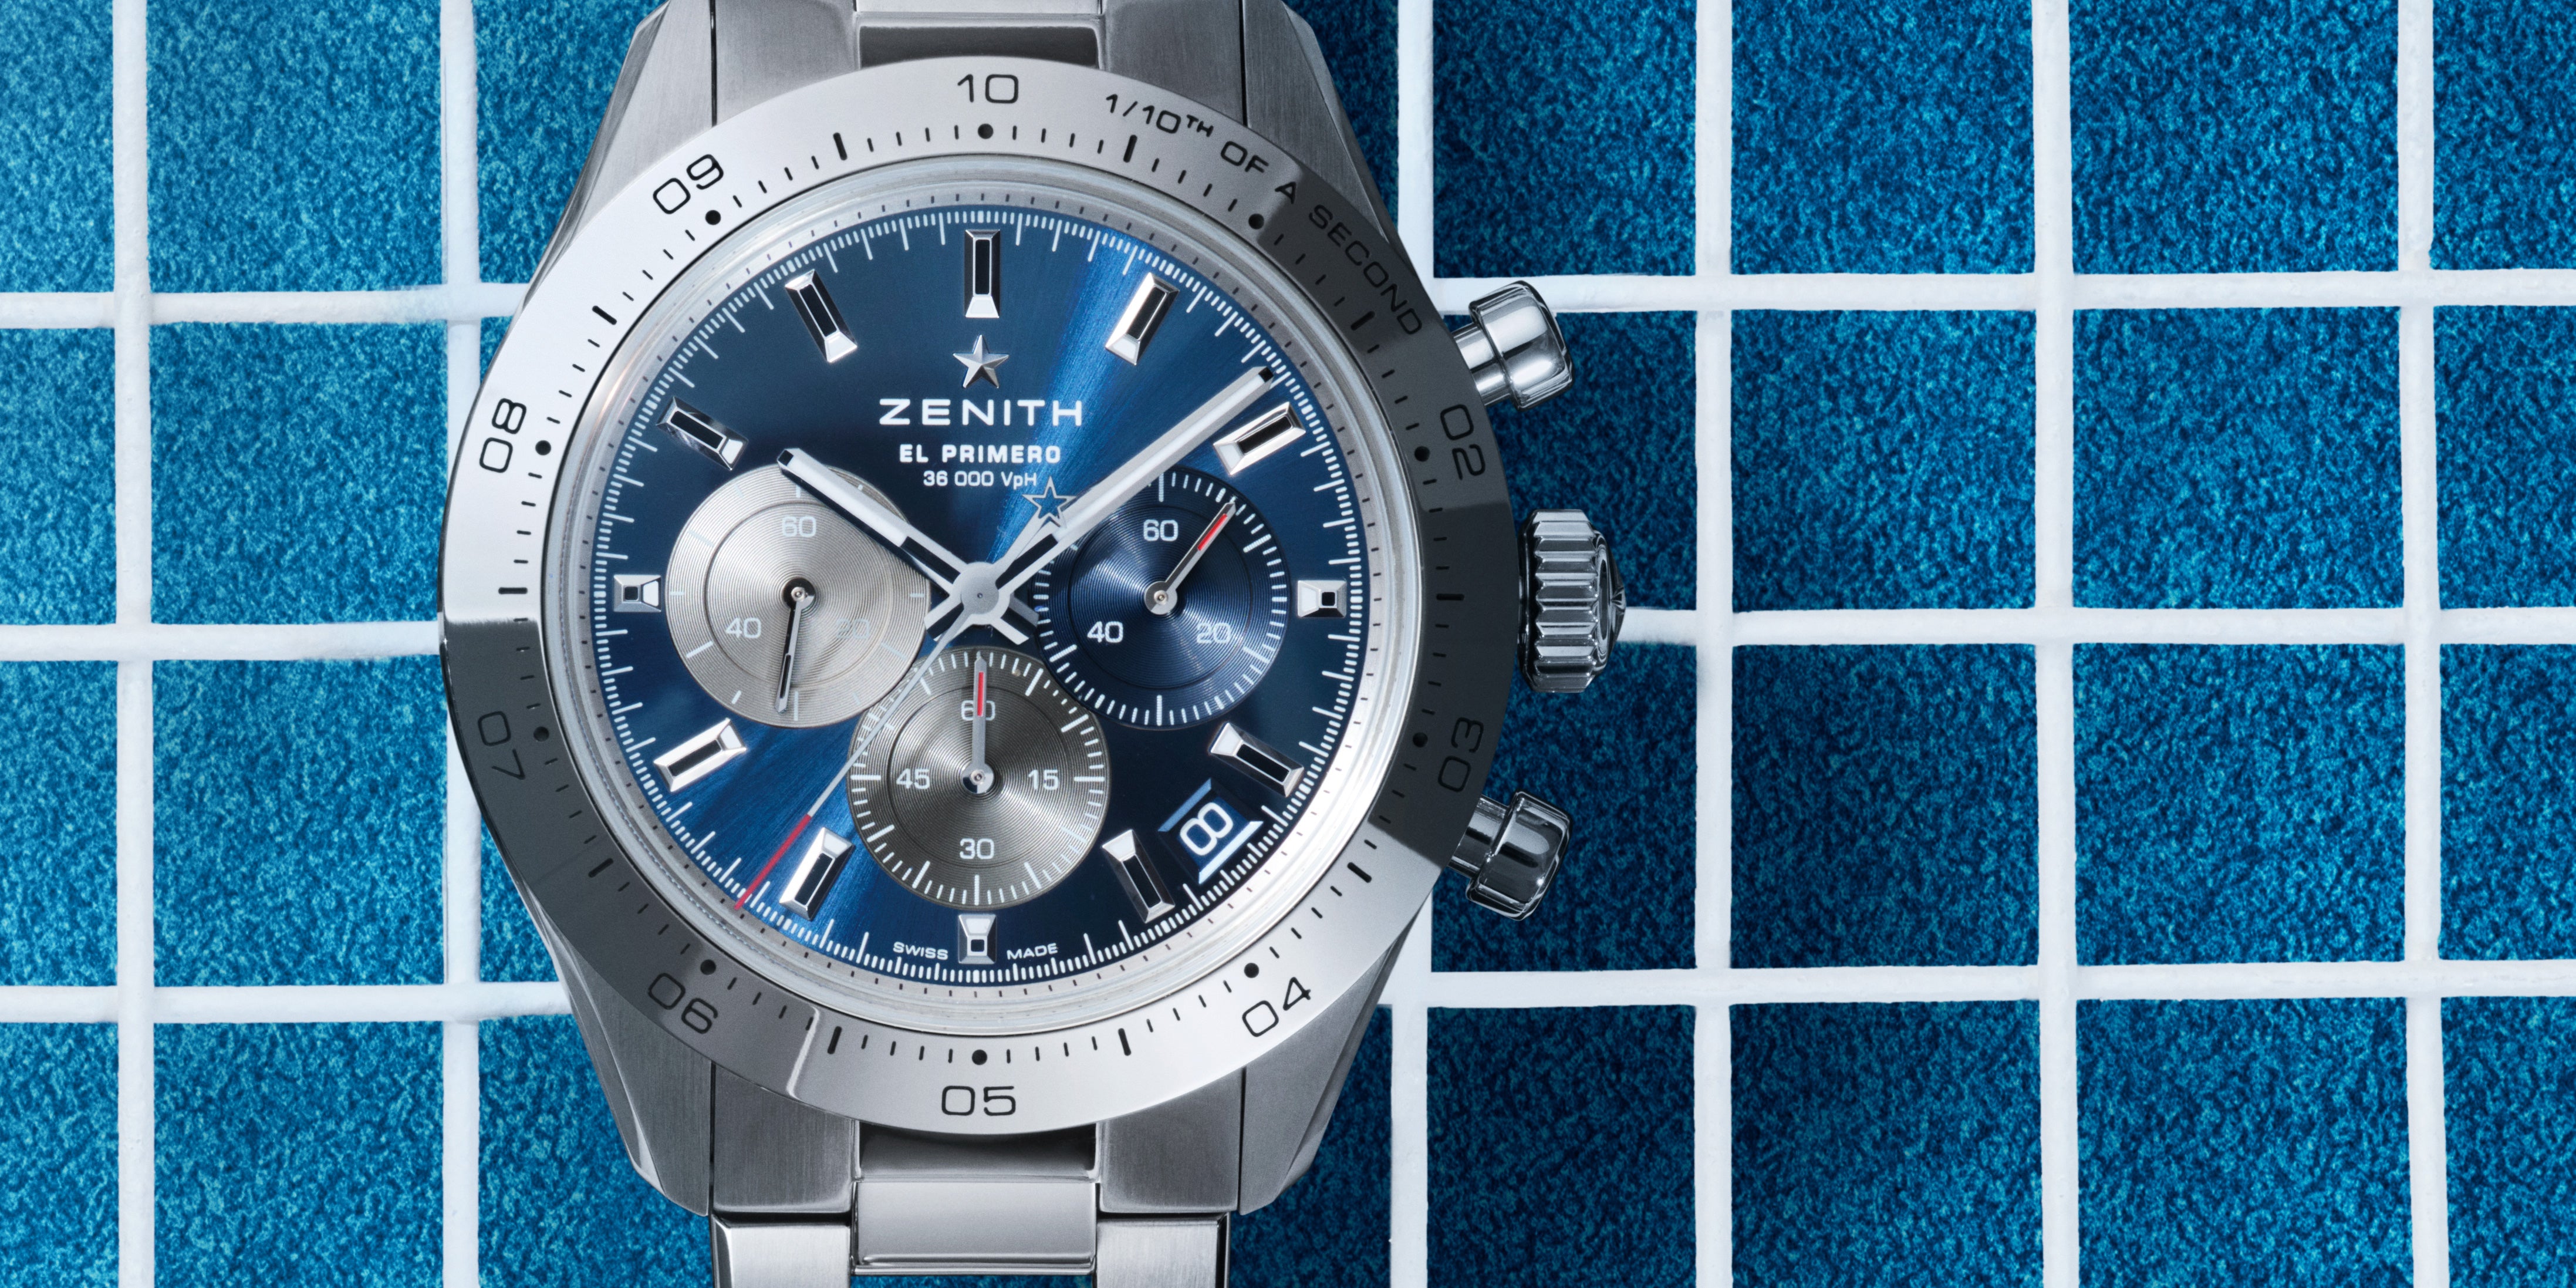 Introducing the 2021 Zenith Chronomaster Sport new watches